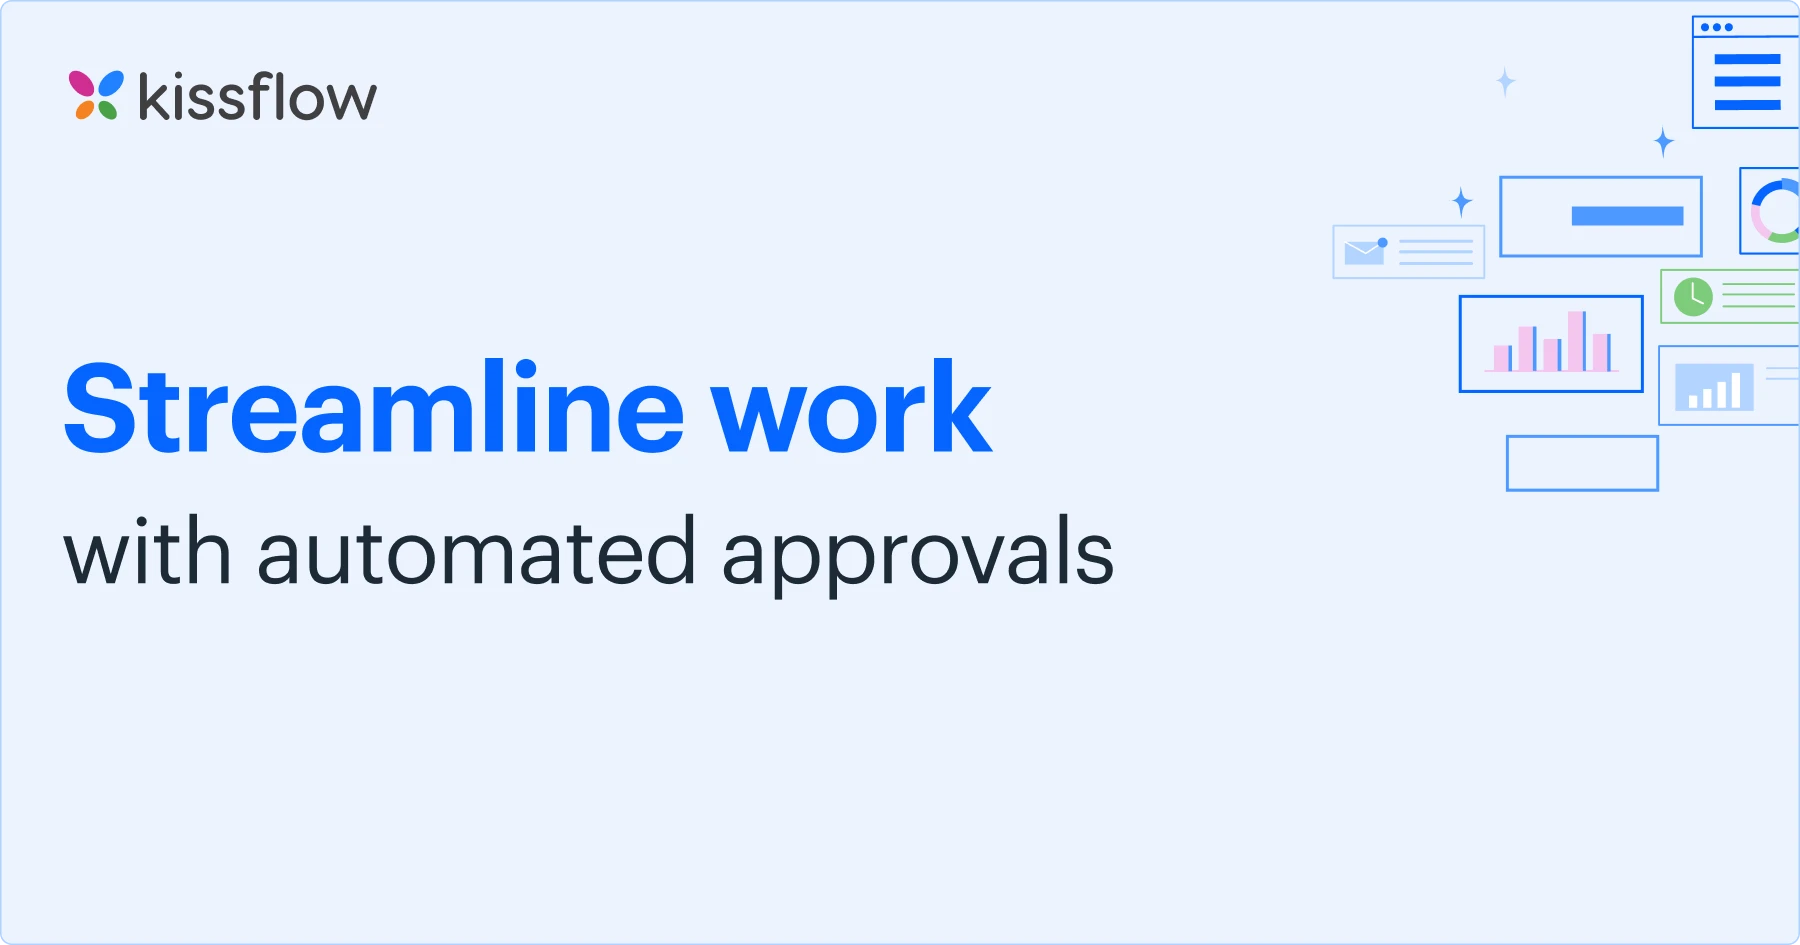 Manage Approvals easily with Kissflow